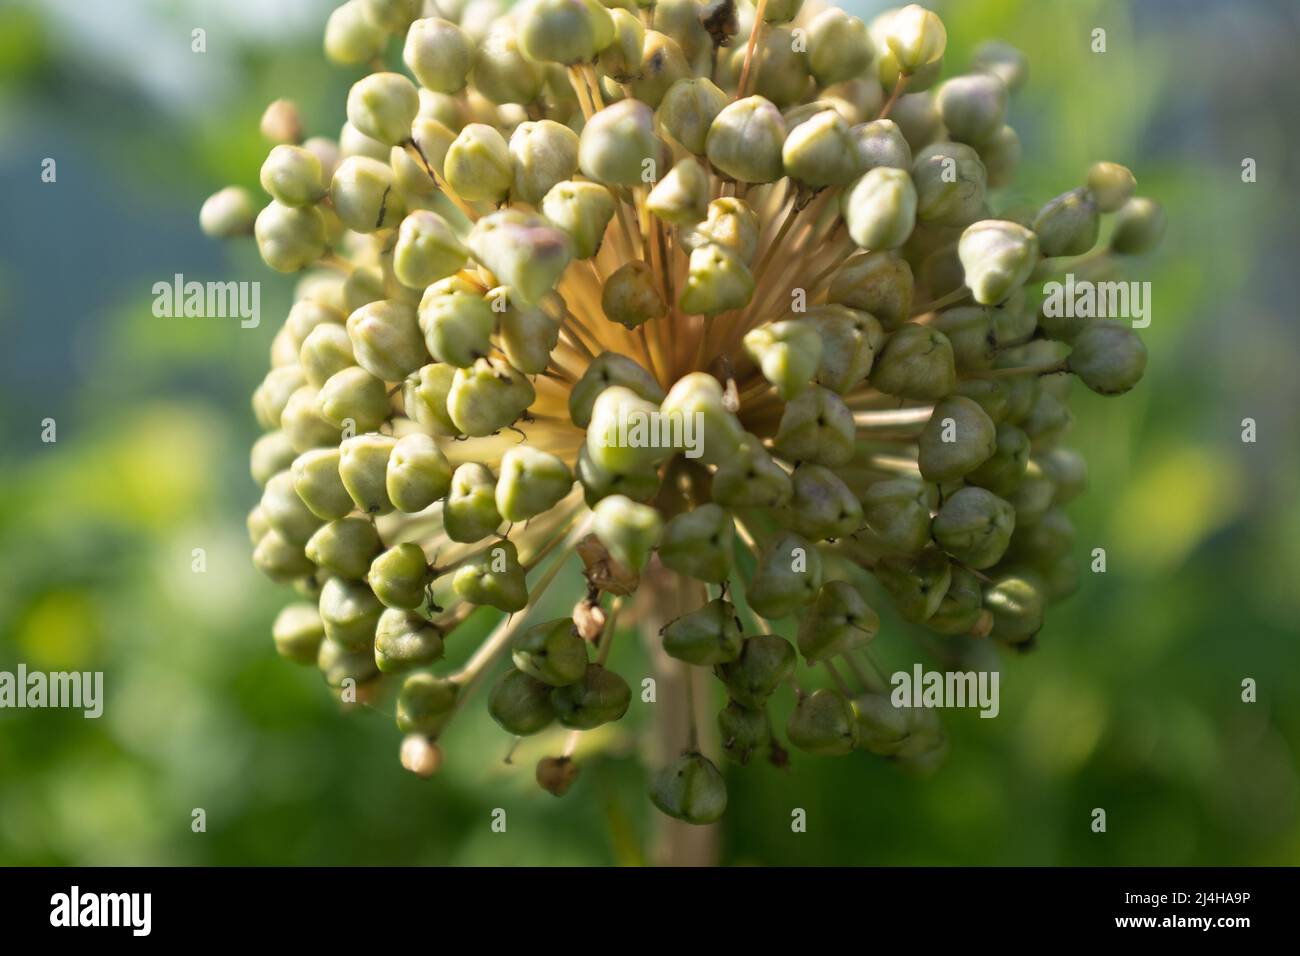 Close-up a green onion inflorescence on a blurred green grass background for publication, poster, calendar, post, screensaver, wallpaper, postcard Stock Photo